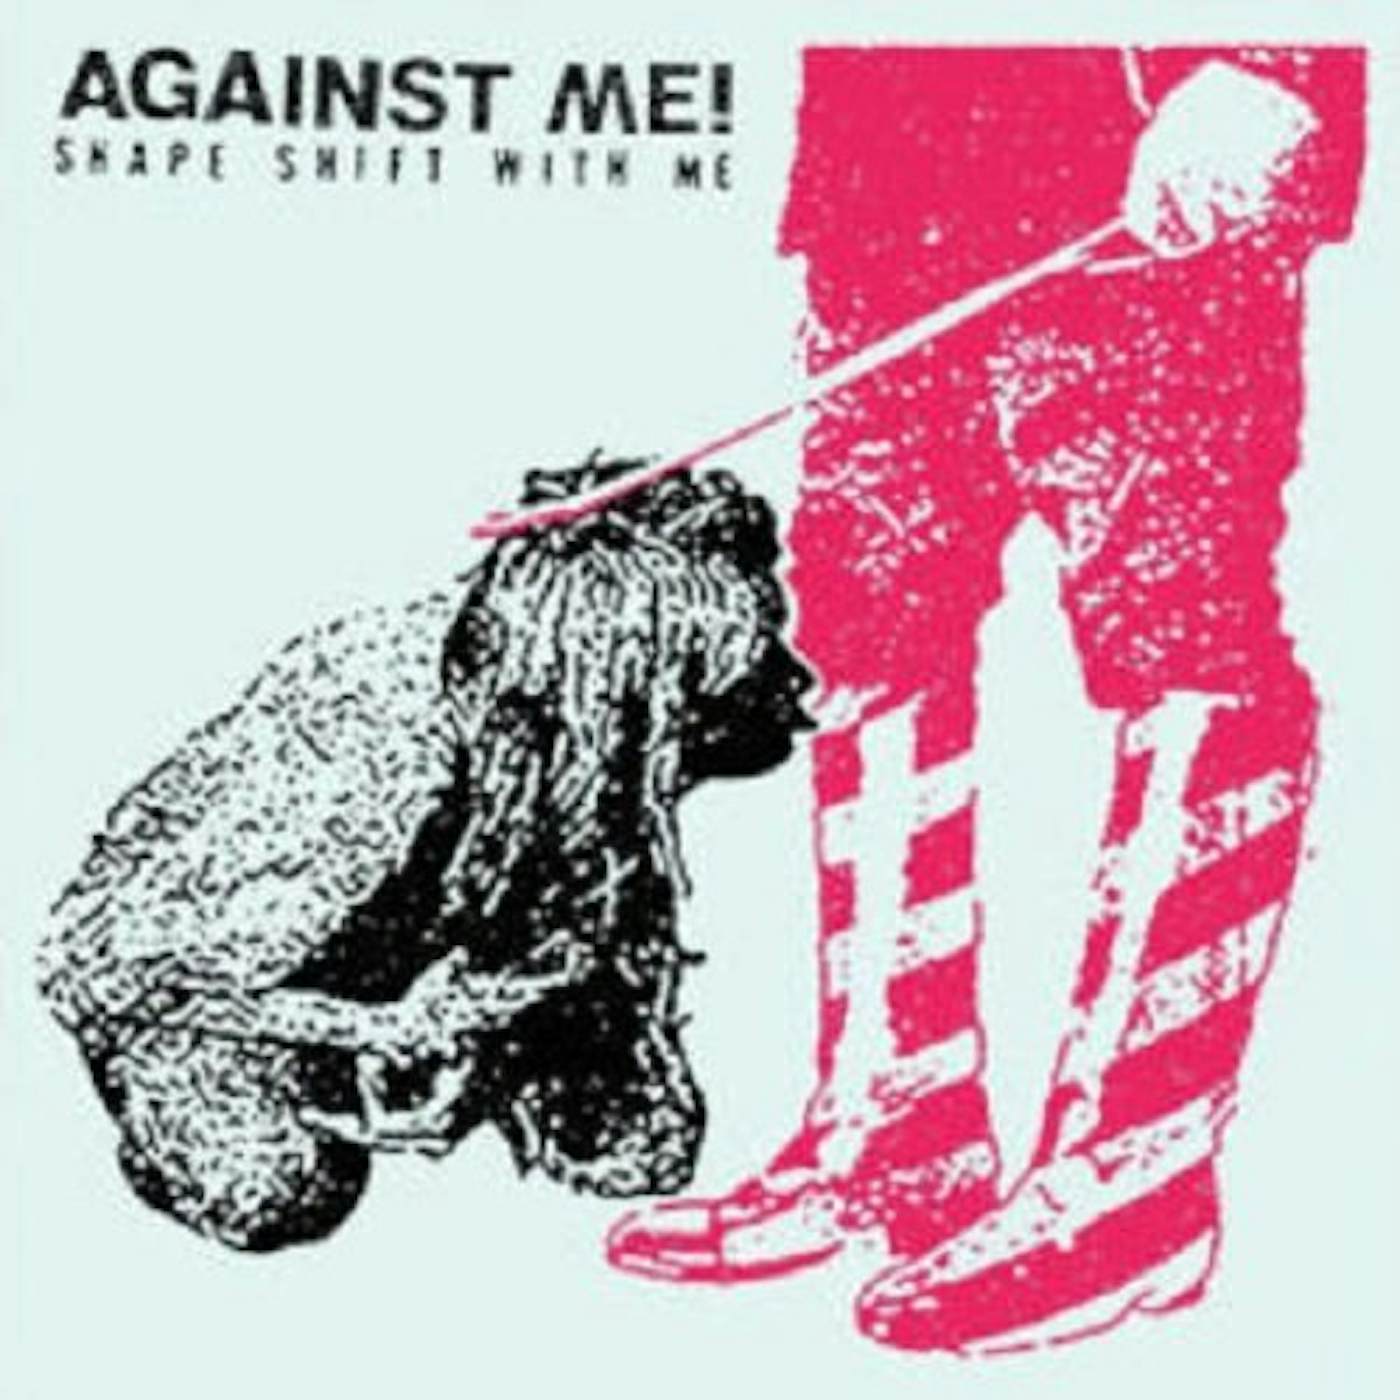 Against Me! Shape Shift with Me Vinyl Record